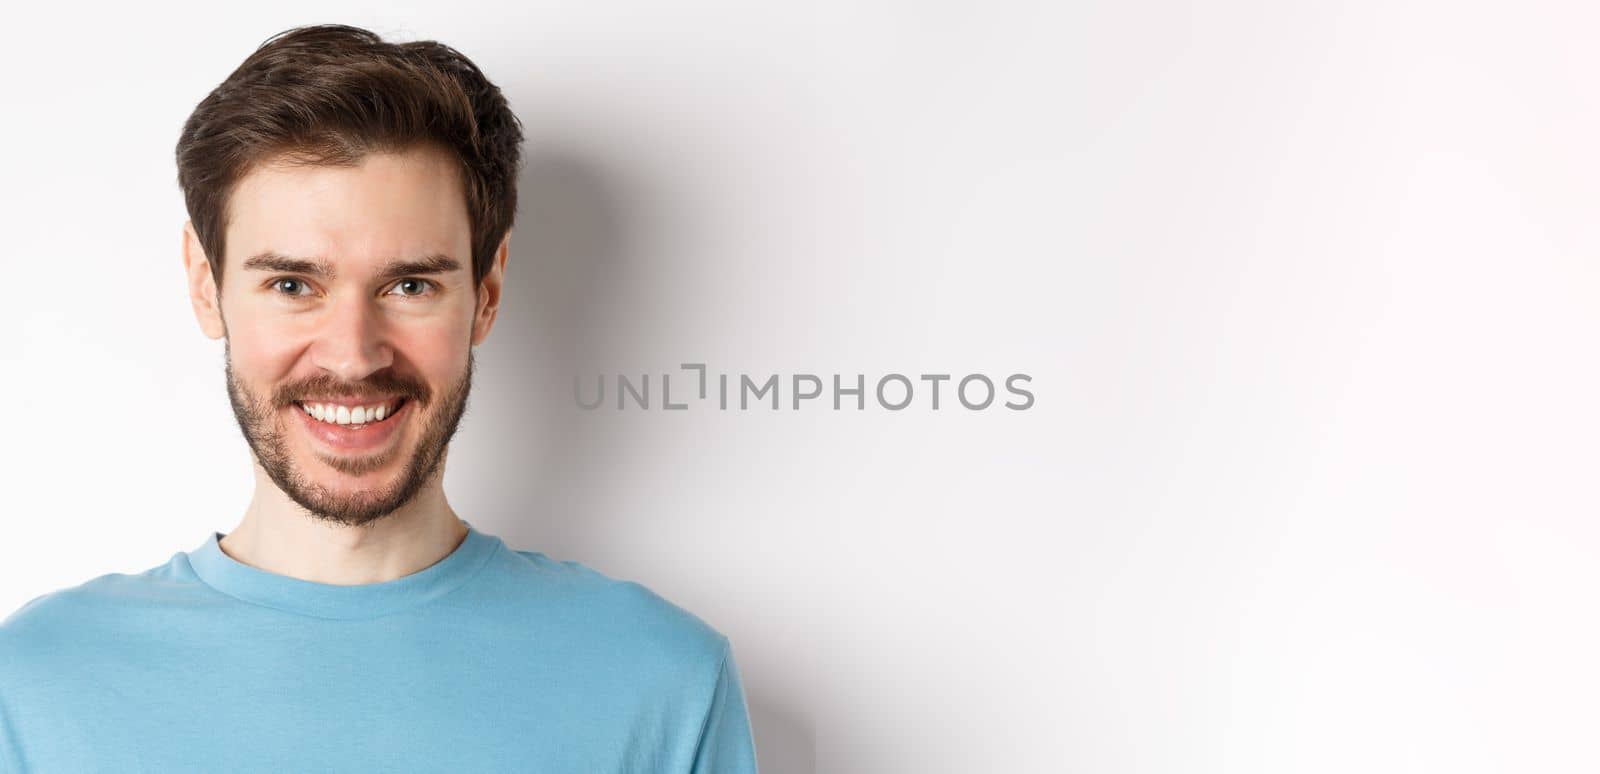 Close-up of handsome caucasian man smiling with white teeth, looking confident at camera, standing in blue shirt on white background.